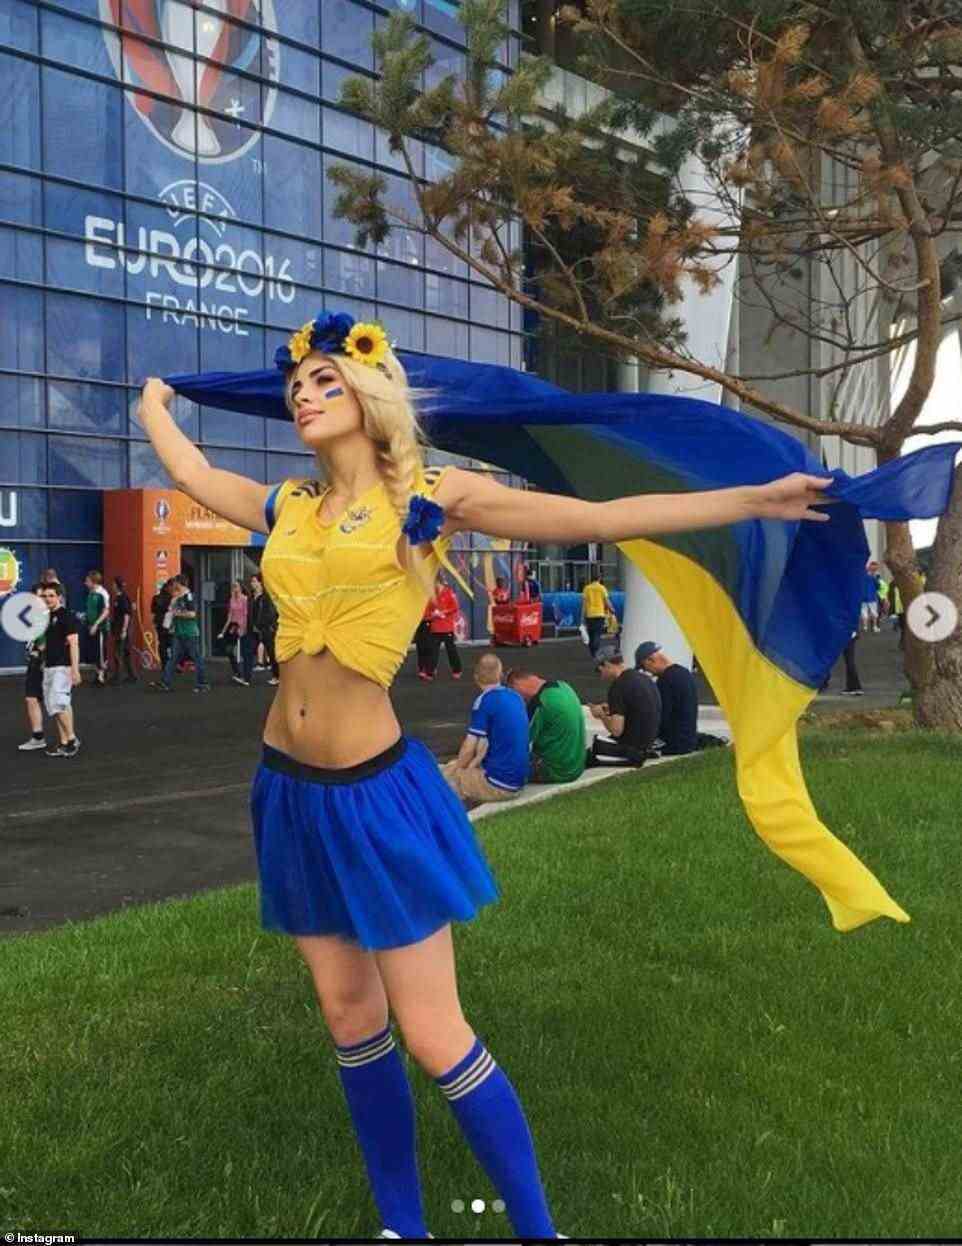 A star in her own right, Vlada has nearly 500,000 followers on Instagram and recently shared a throwback of herself in the stands at Euro 2016, dress in yellow and blue and showing off her washboard abs in a tiny crop top.